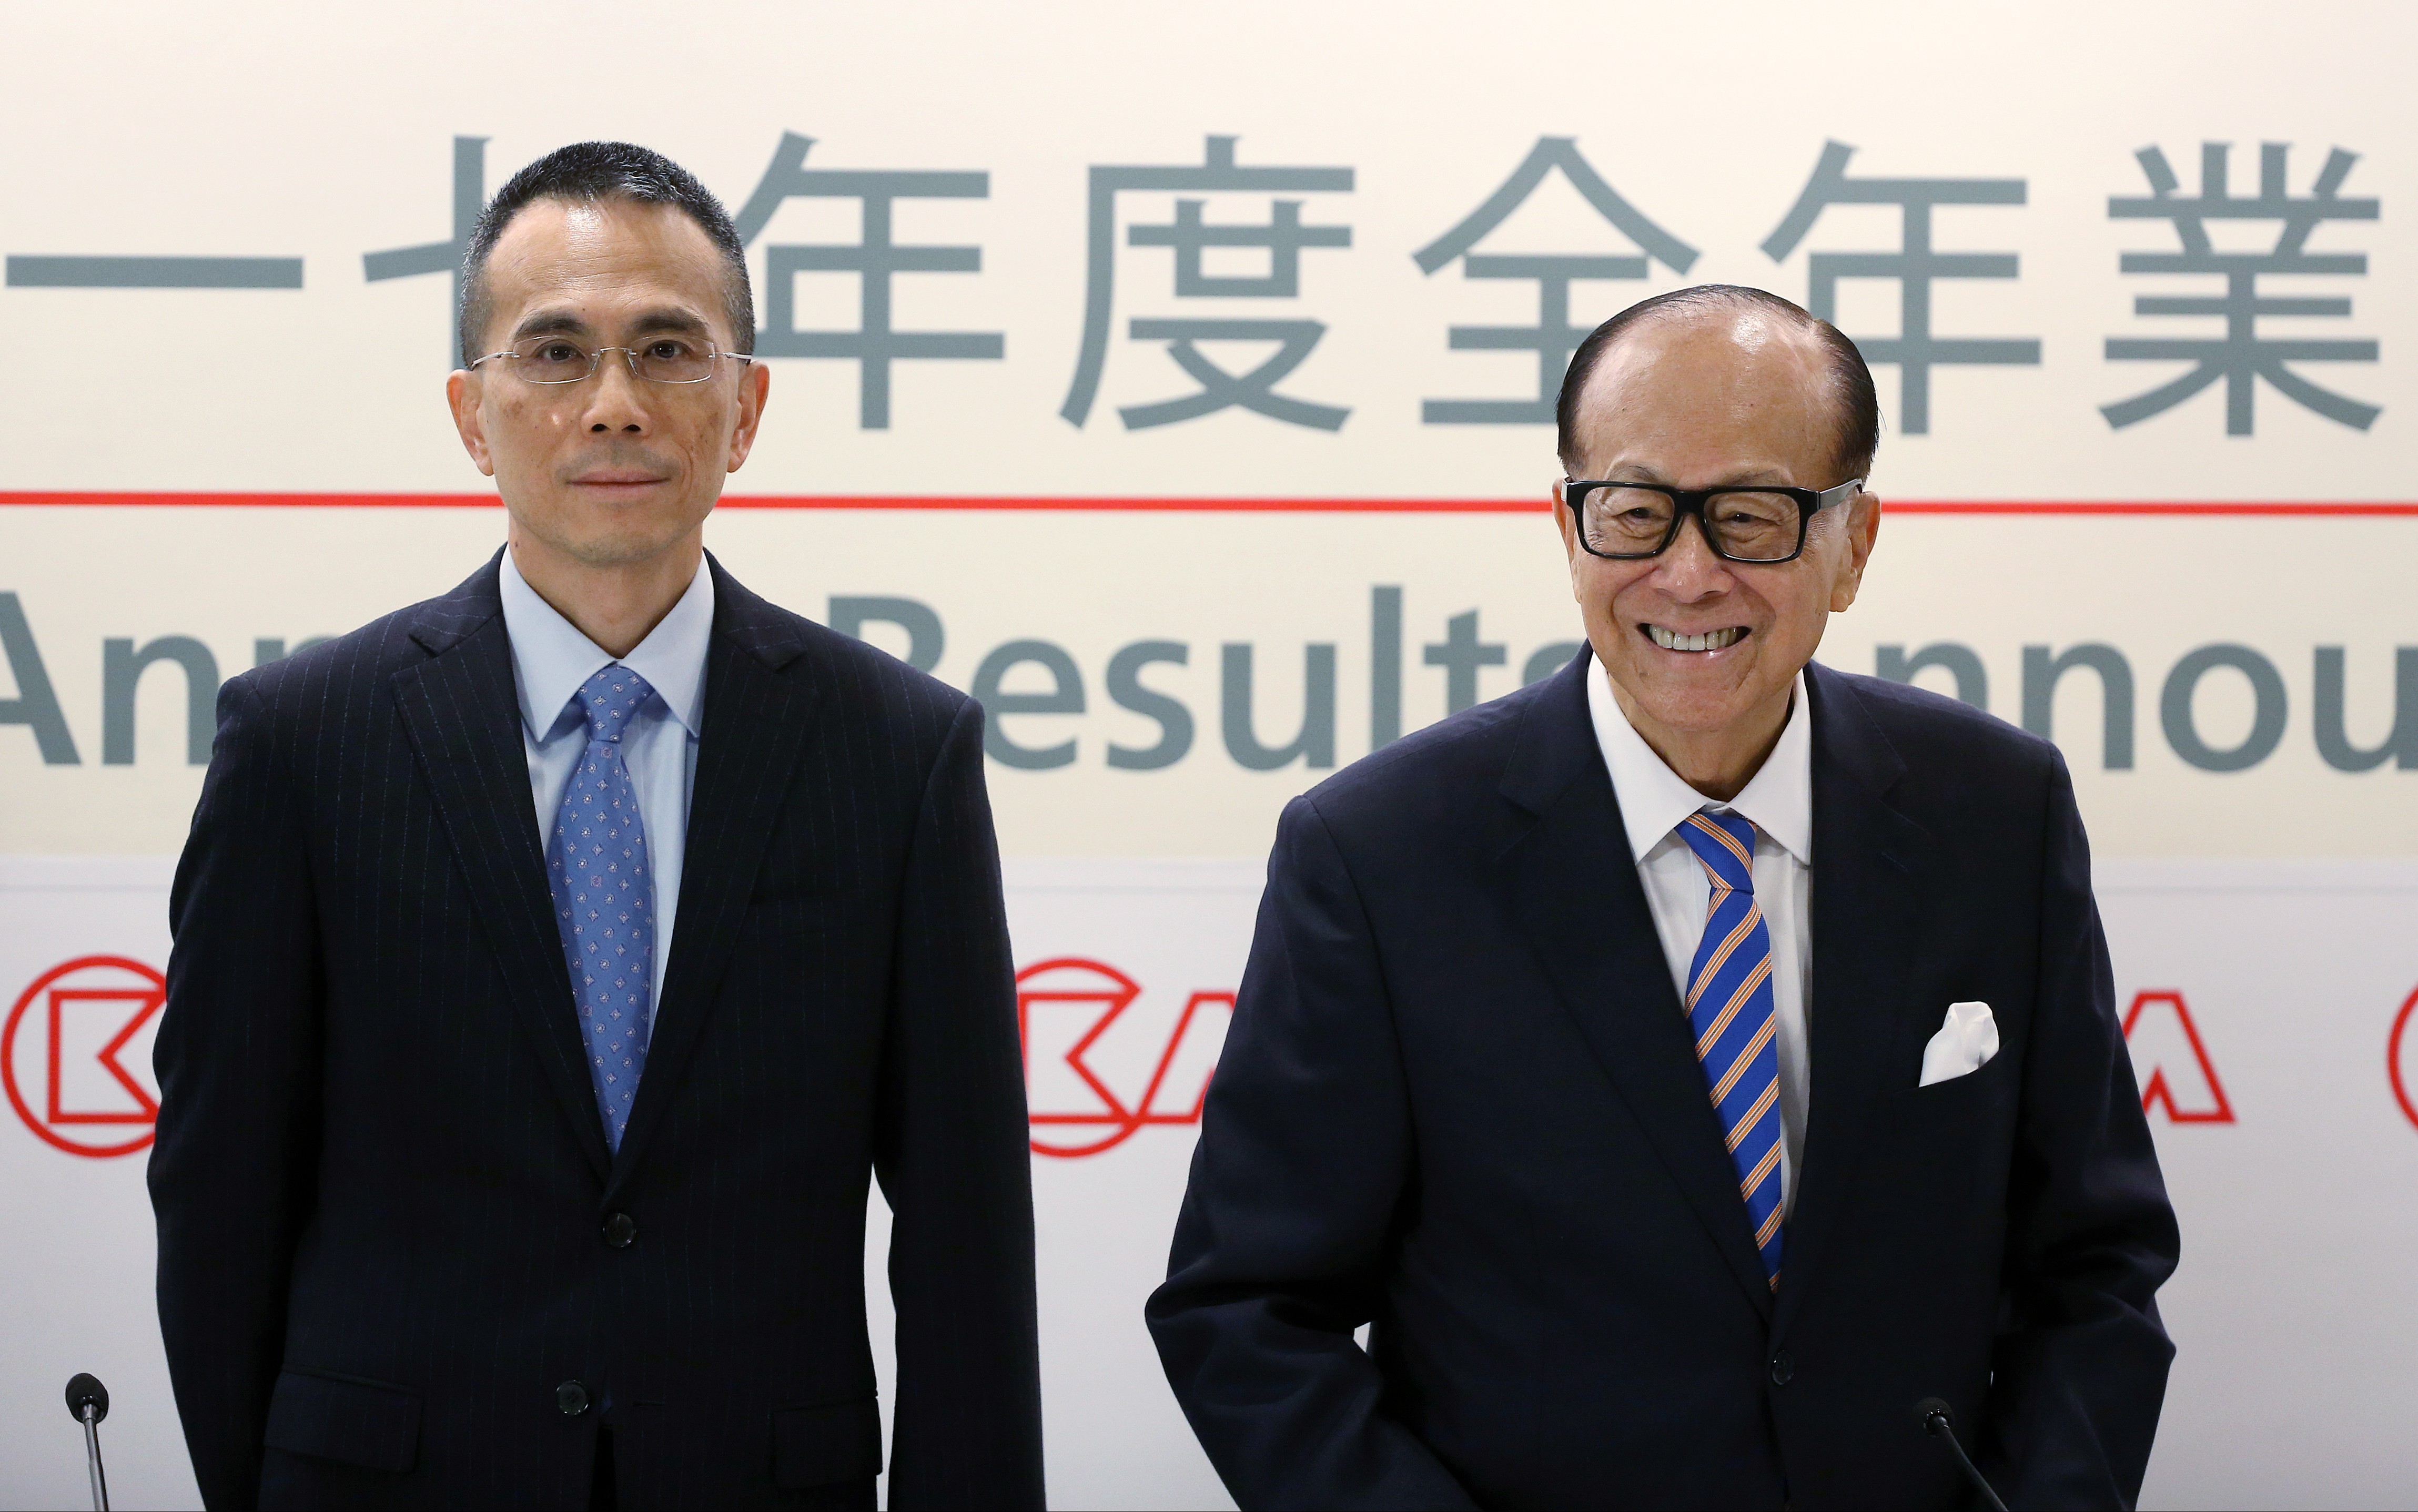 Victor Li Tzar-kuoi (left) and his father Li Ka-shing pictured at the CK Hutchison Holdings Limited and CK Asset Holdings 2017 annual results announcement in Central. Victor Li took over from his father as chairman of the two companies in March. Photo: Sam Tsang